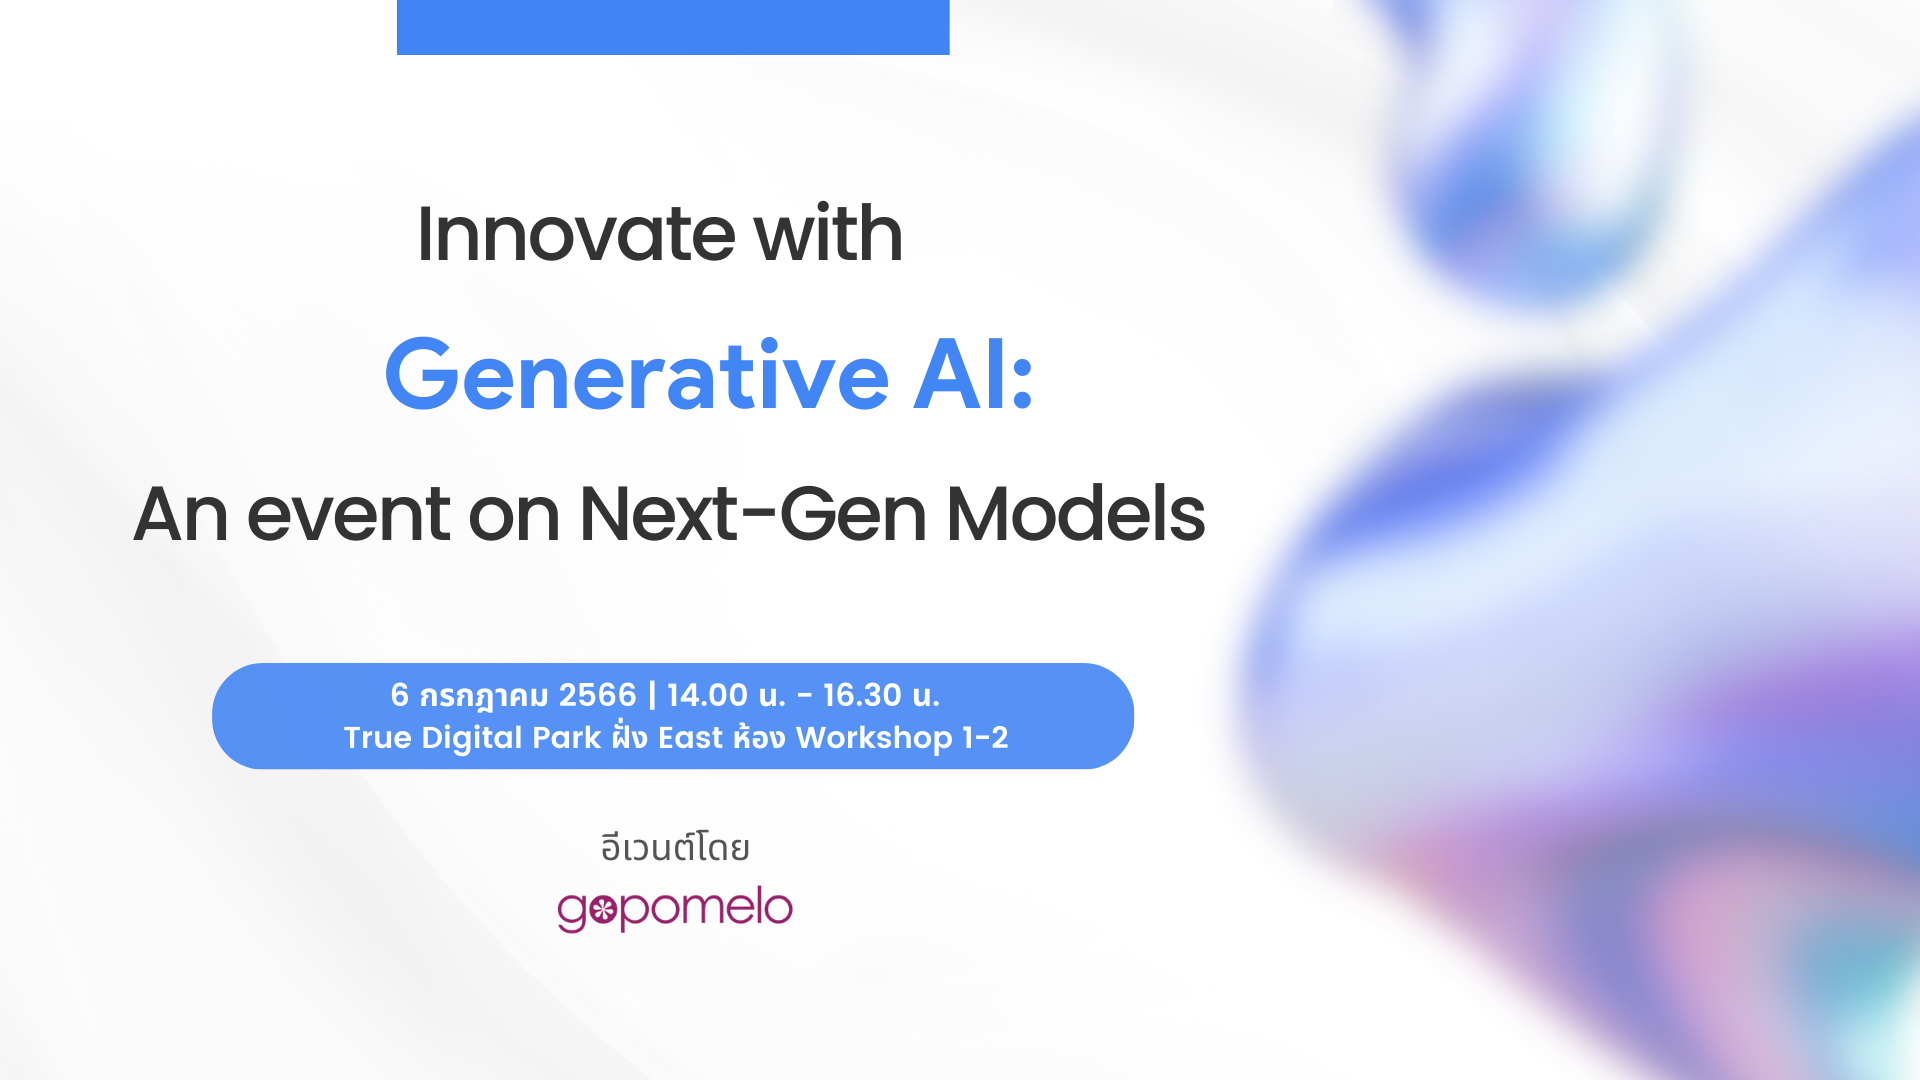 Innovating with Generative AI: An event on Next-Gen Models